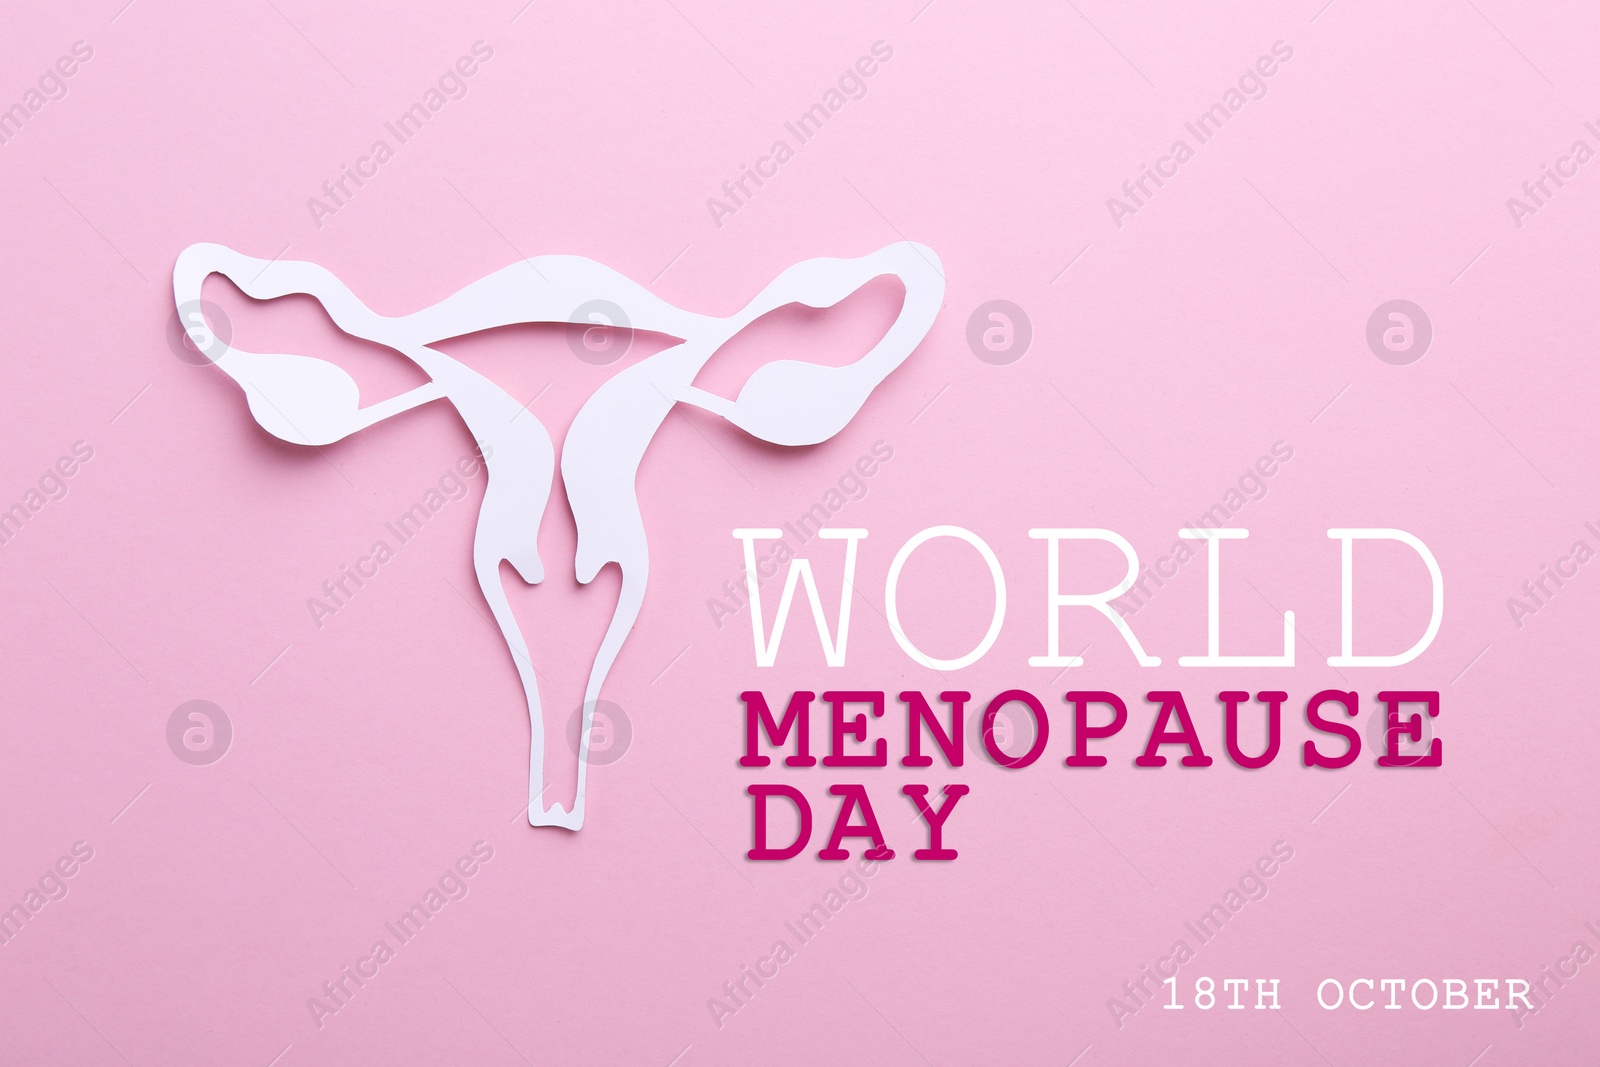 Image of World Menopause Day - October, 18. Paper uterus on pink background, top view